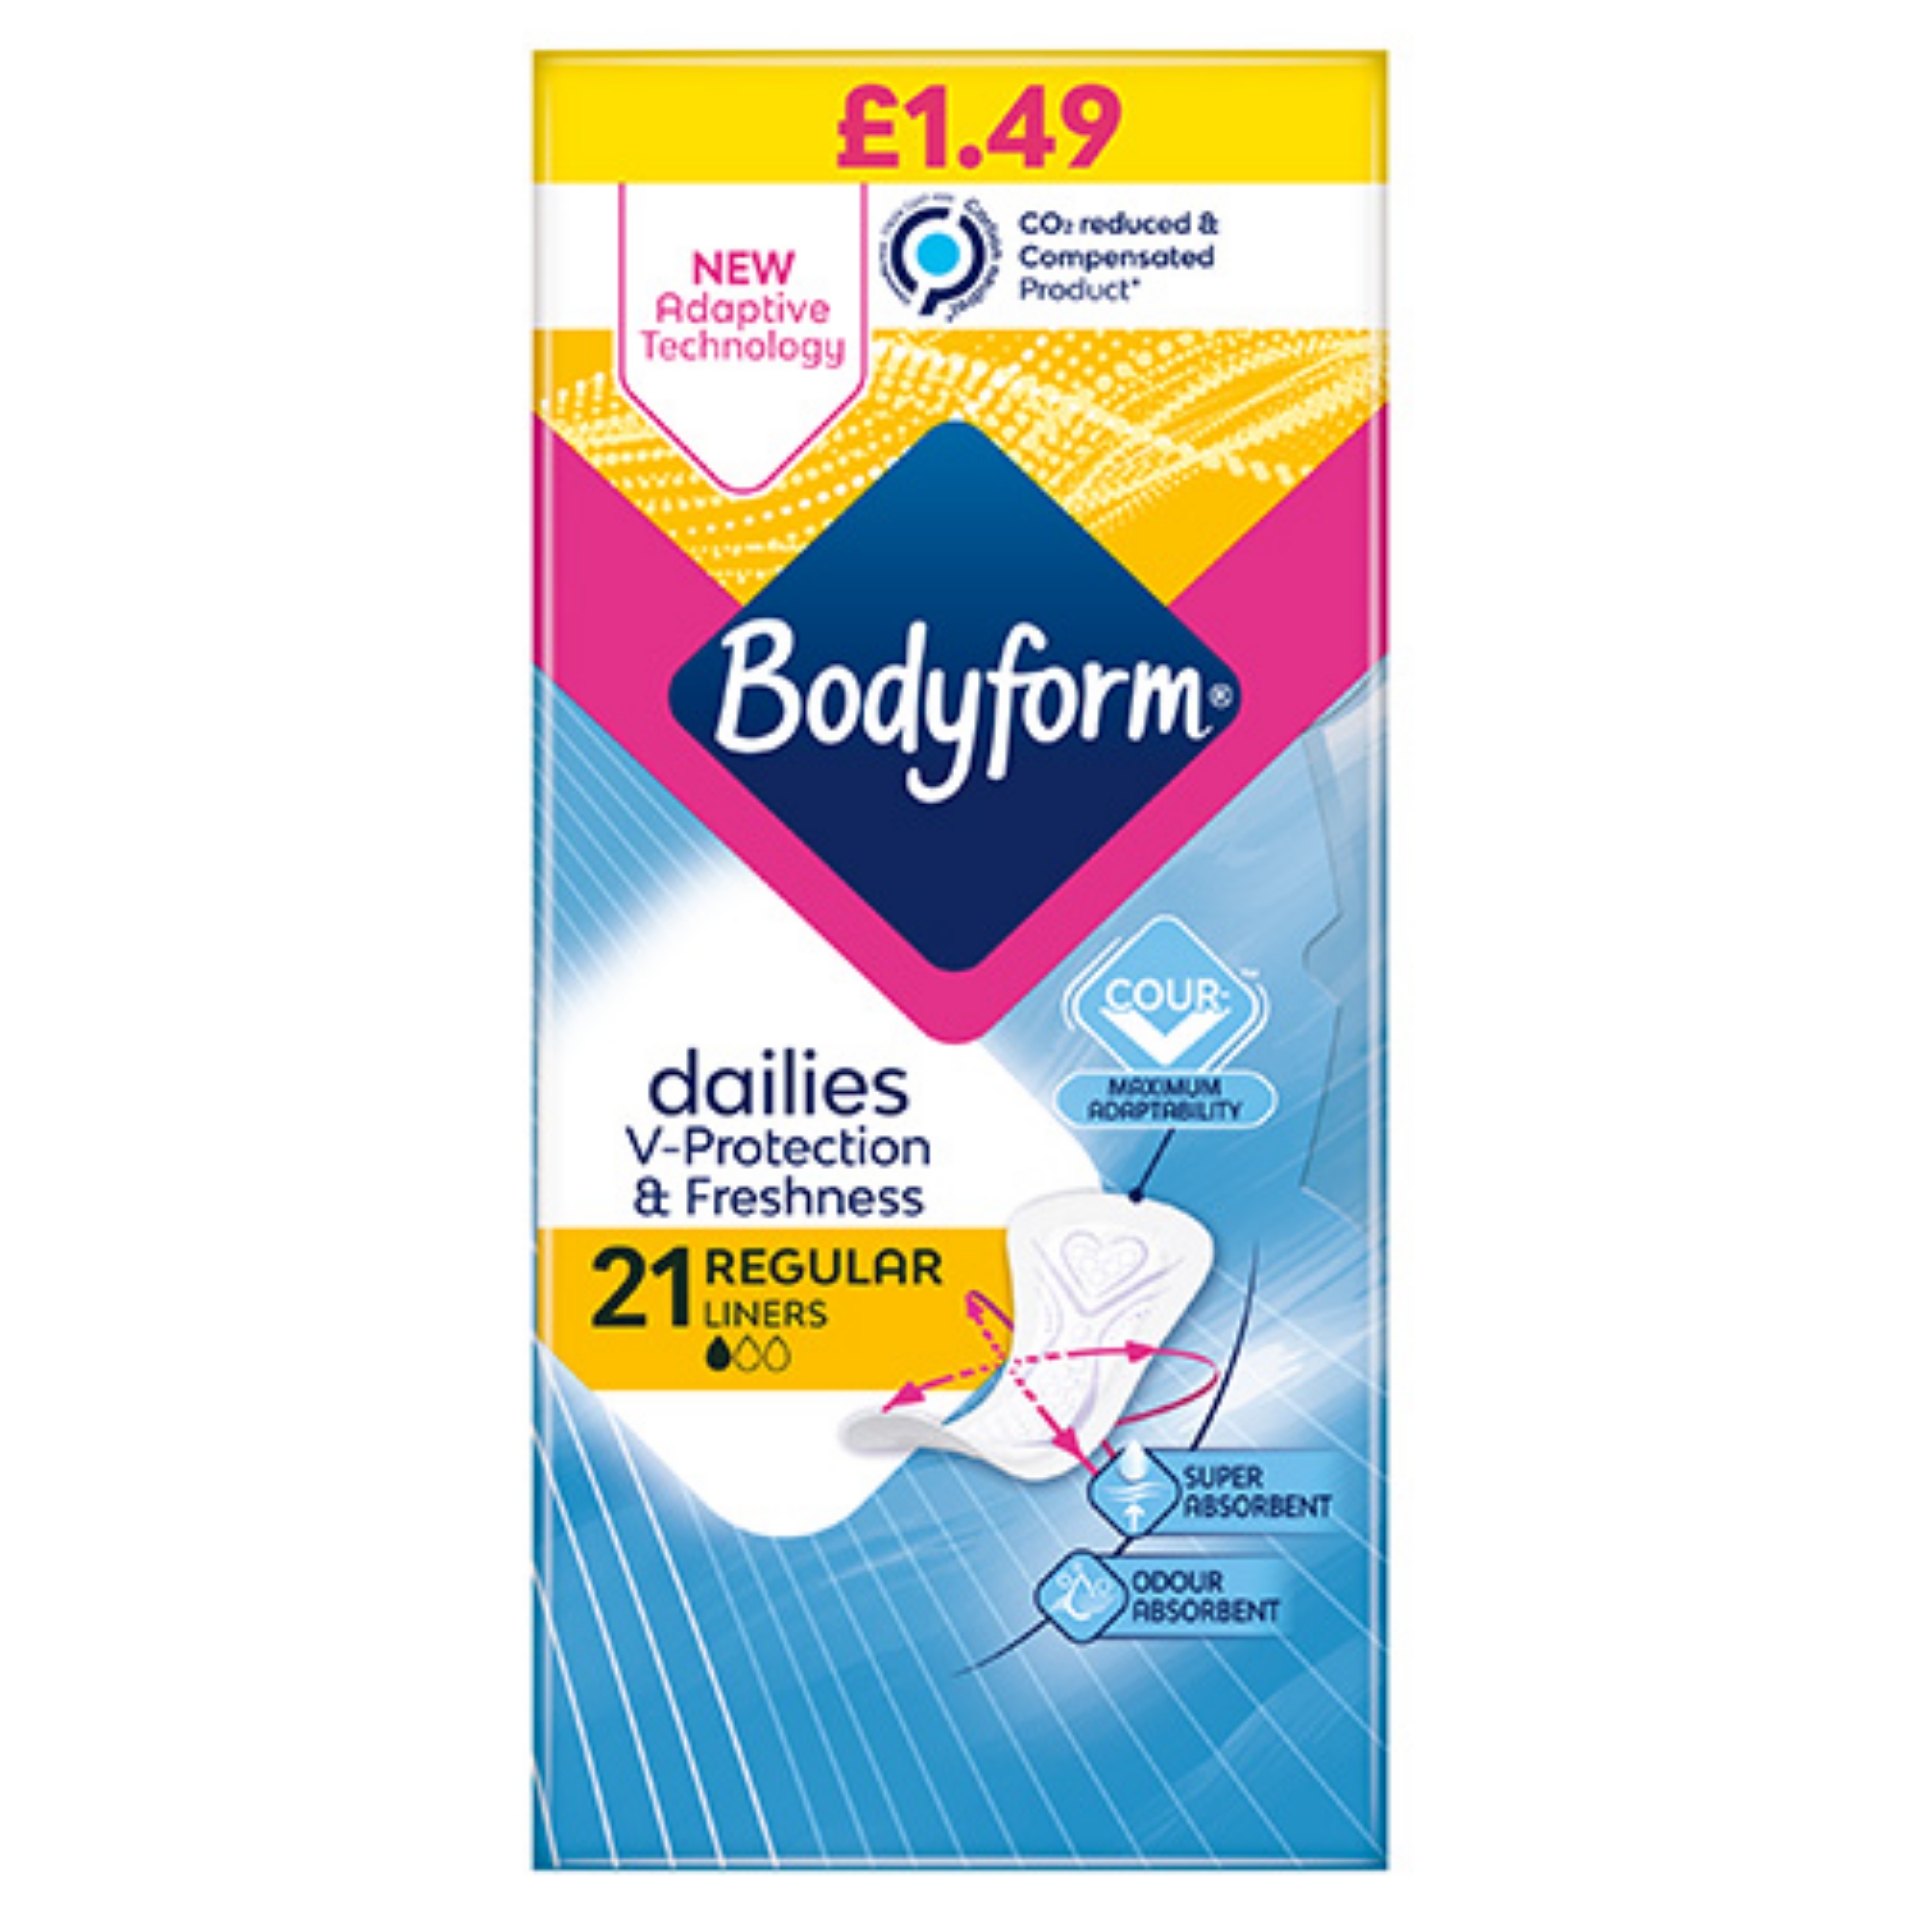 Picture of BODYFORM DAILIES V-PROTECTION NORMAL LINERS pm1.49